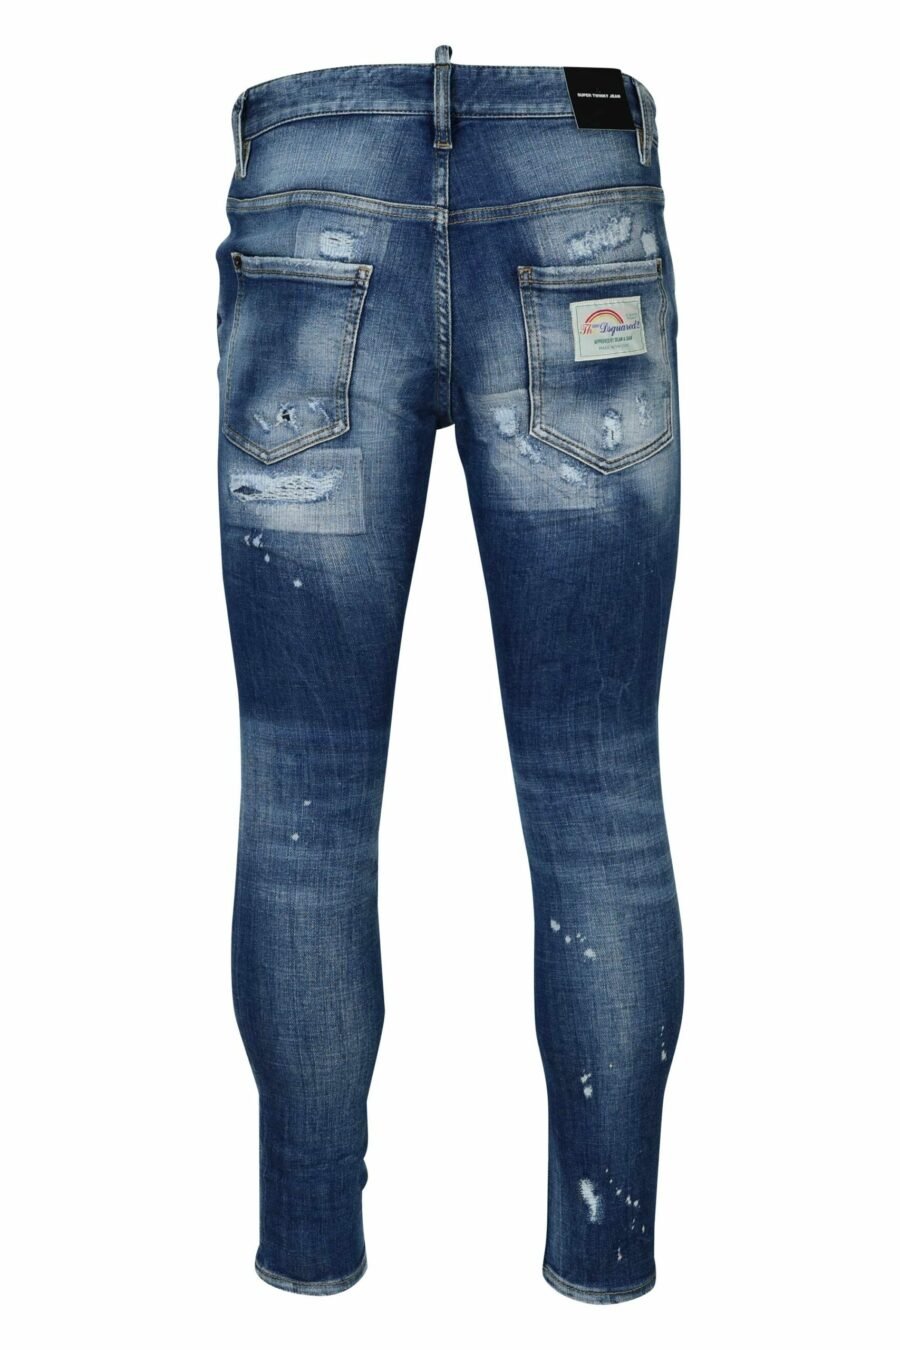 Blue "super twinky jean" jeans with rips - 8054148339029 2 scaled